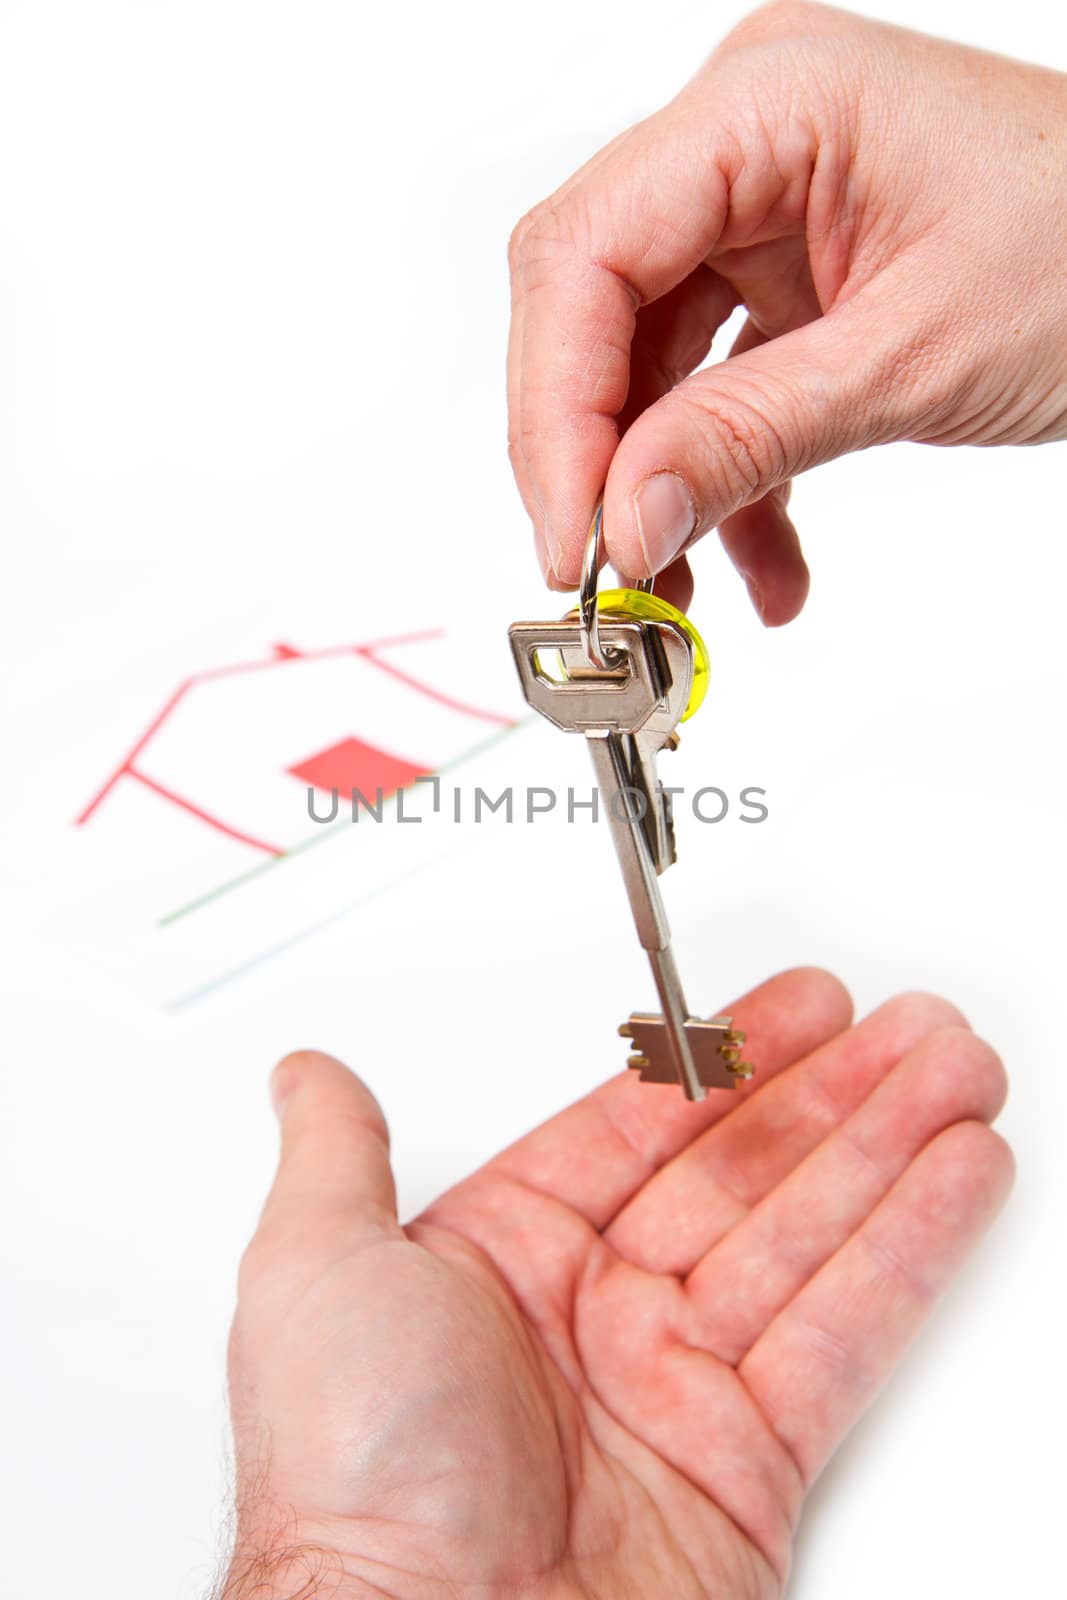 Human hands and key isolated on white background 